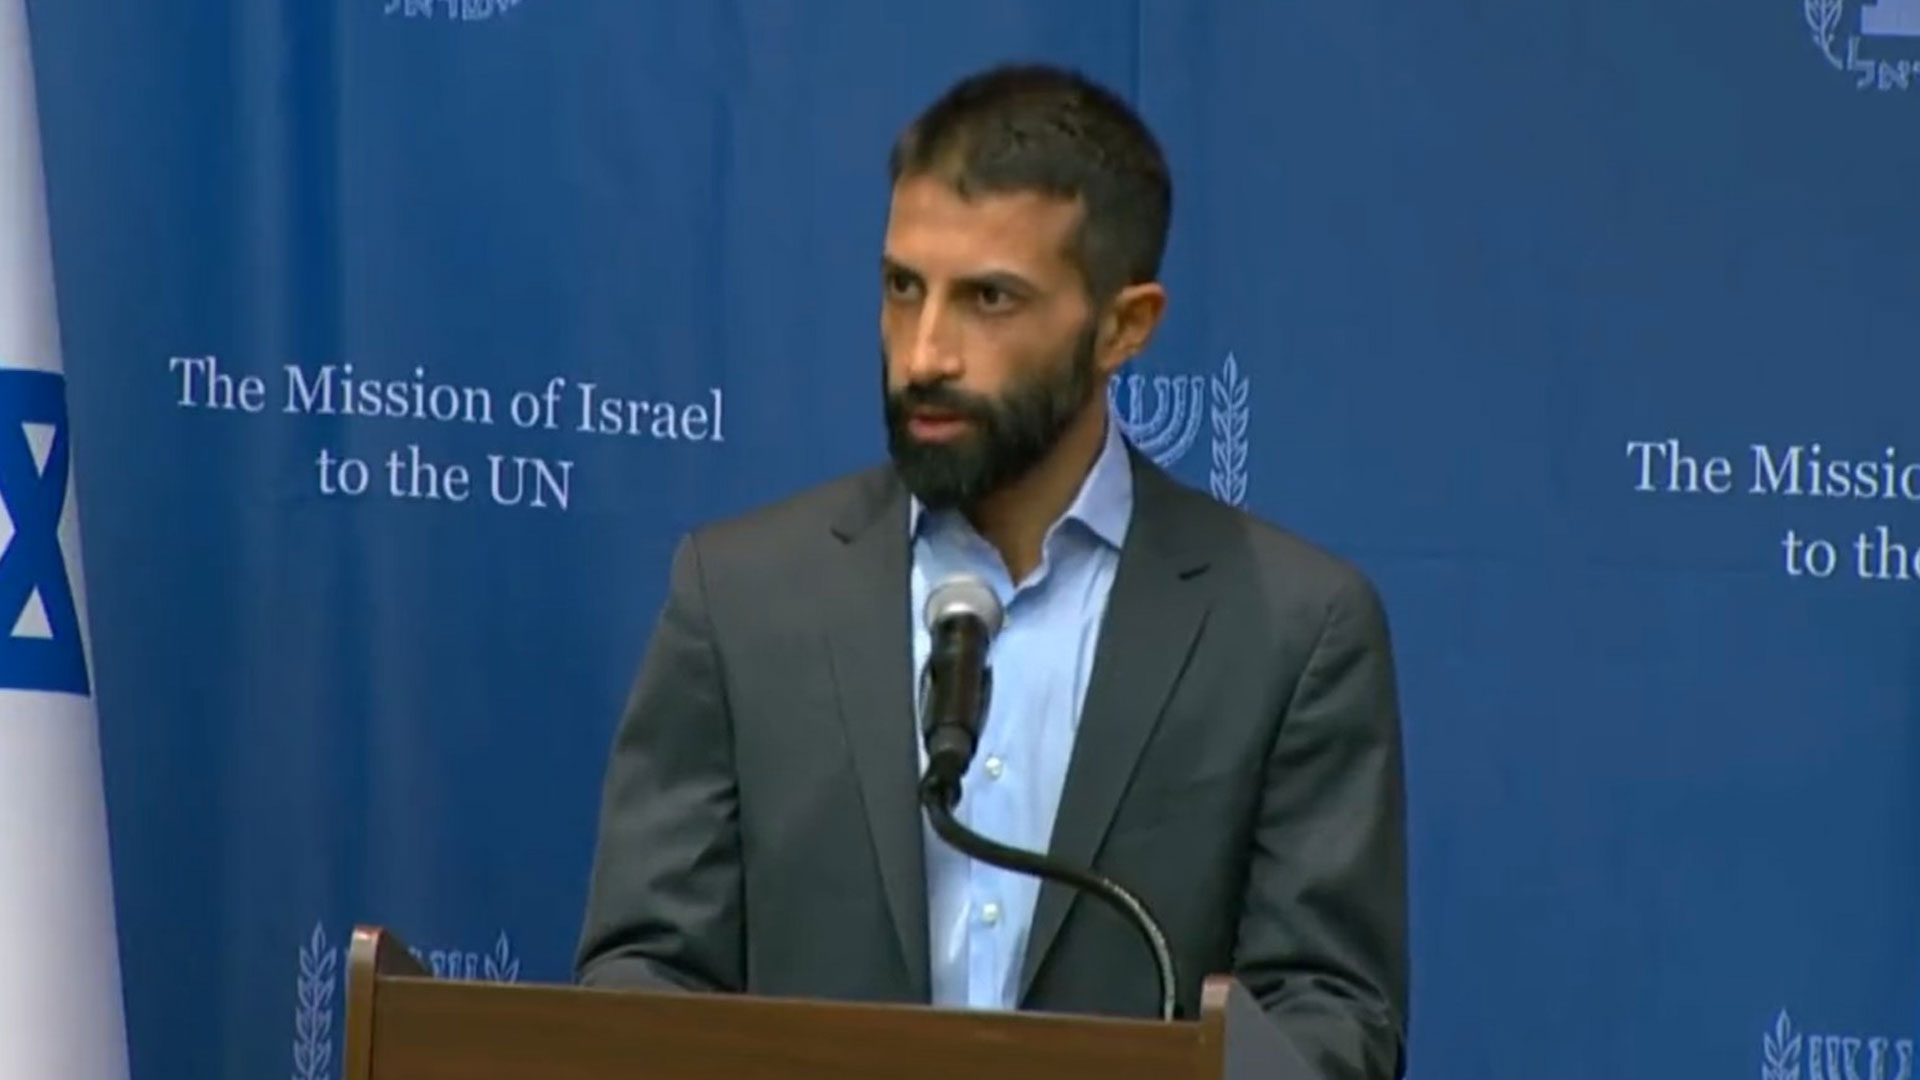 Son of Hamas co-founder condemns group at UN, exposes 'savage' indoctrination of Palestinian children